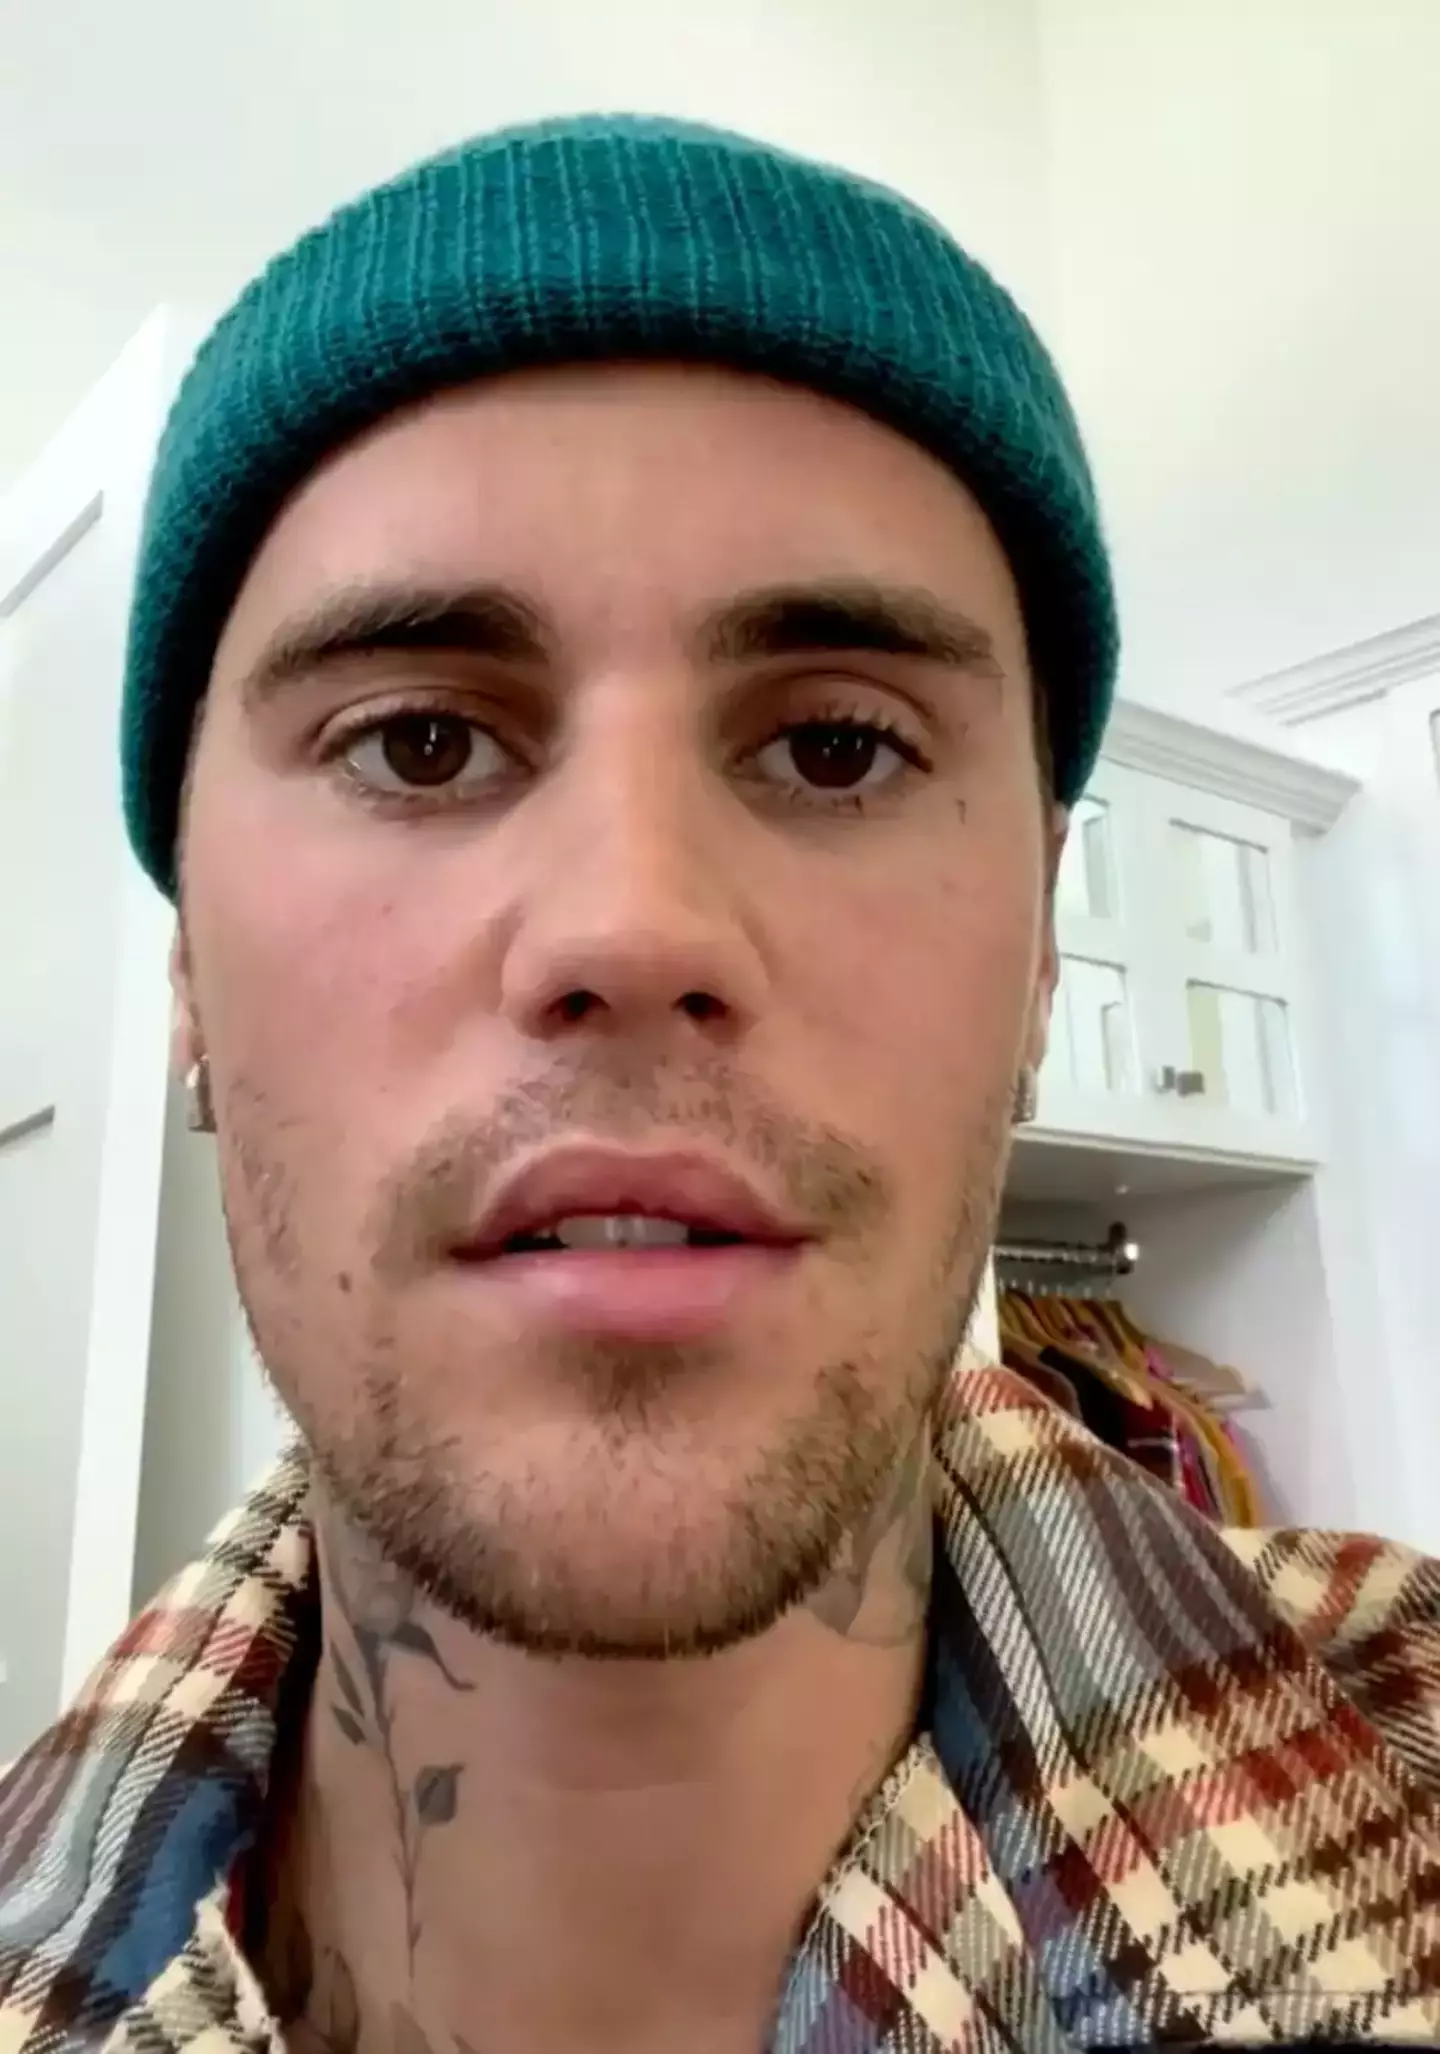 Justin Bieber shared a health update with fans.